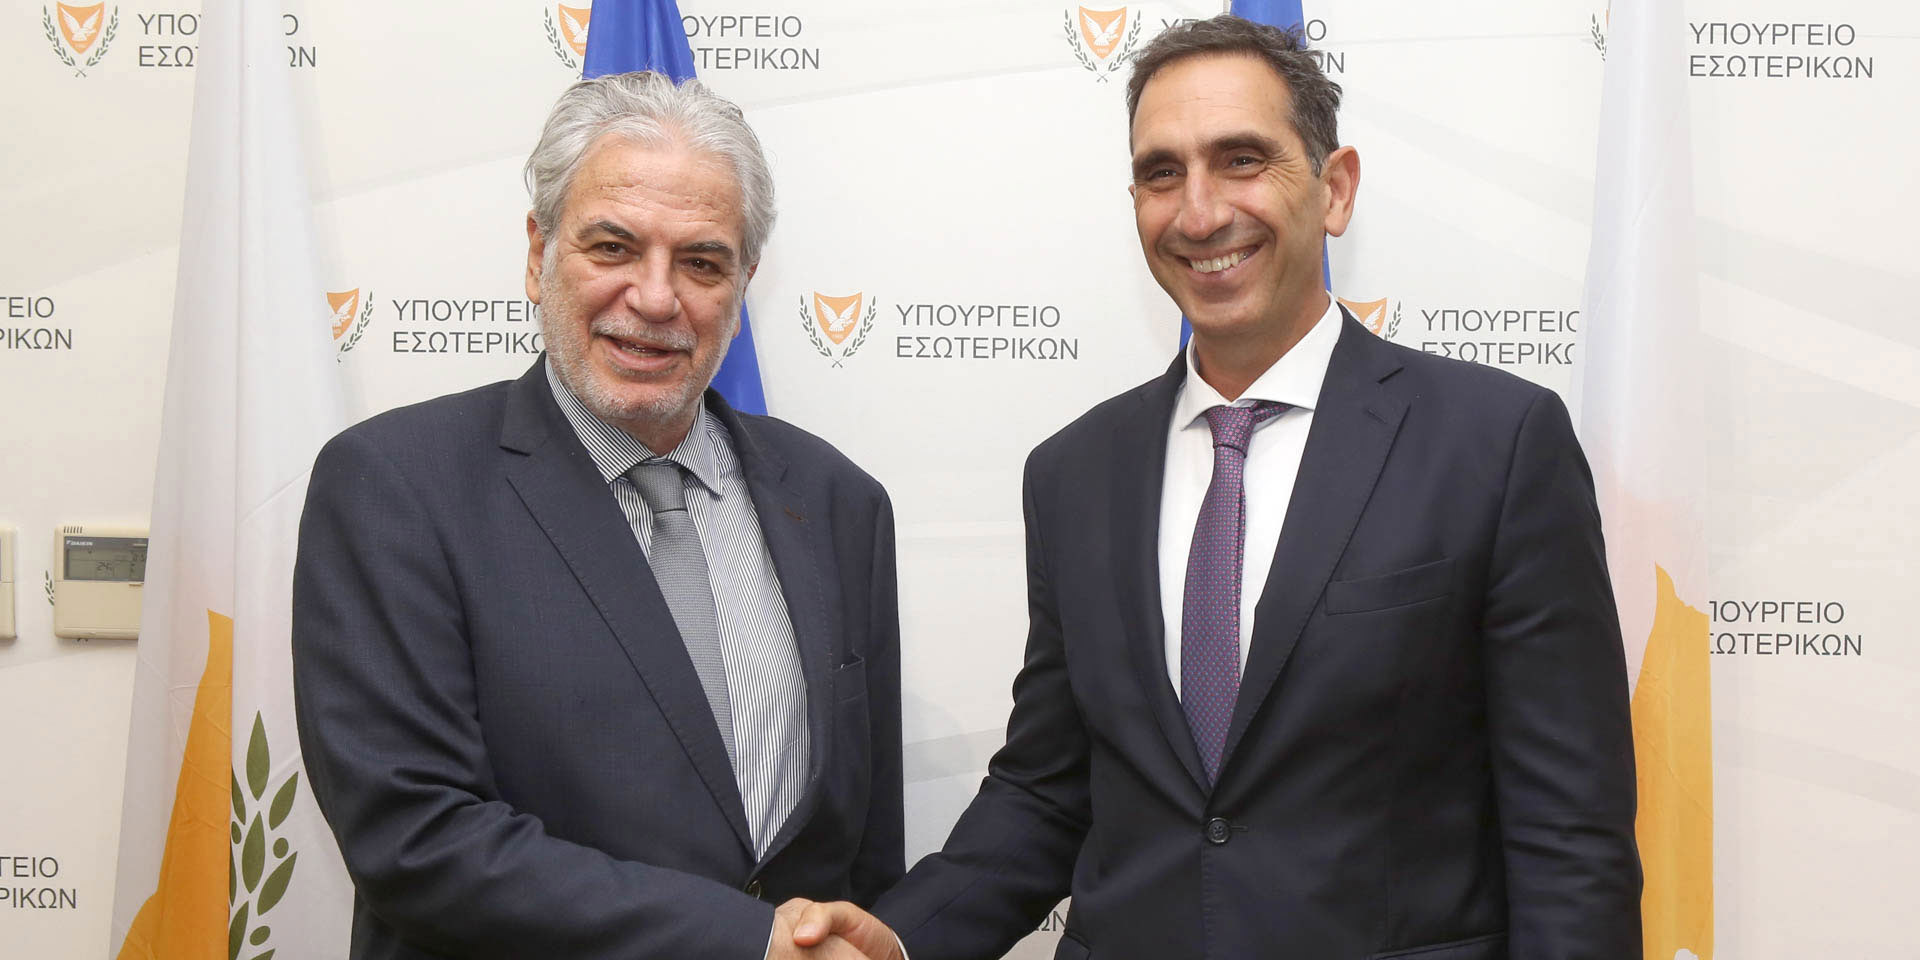 Cypriot and Greek ministers discuss migration